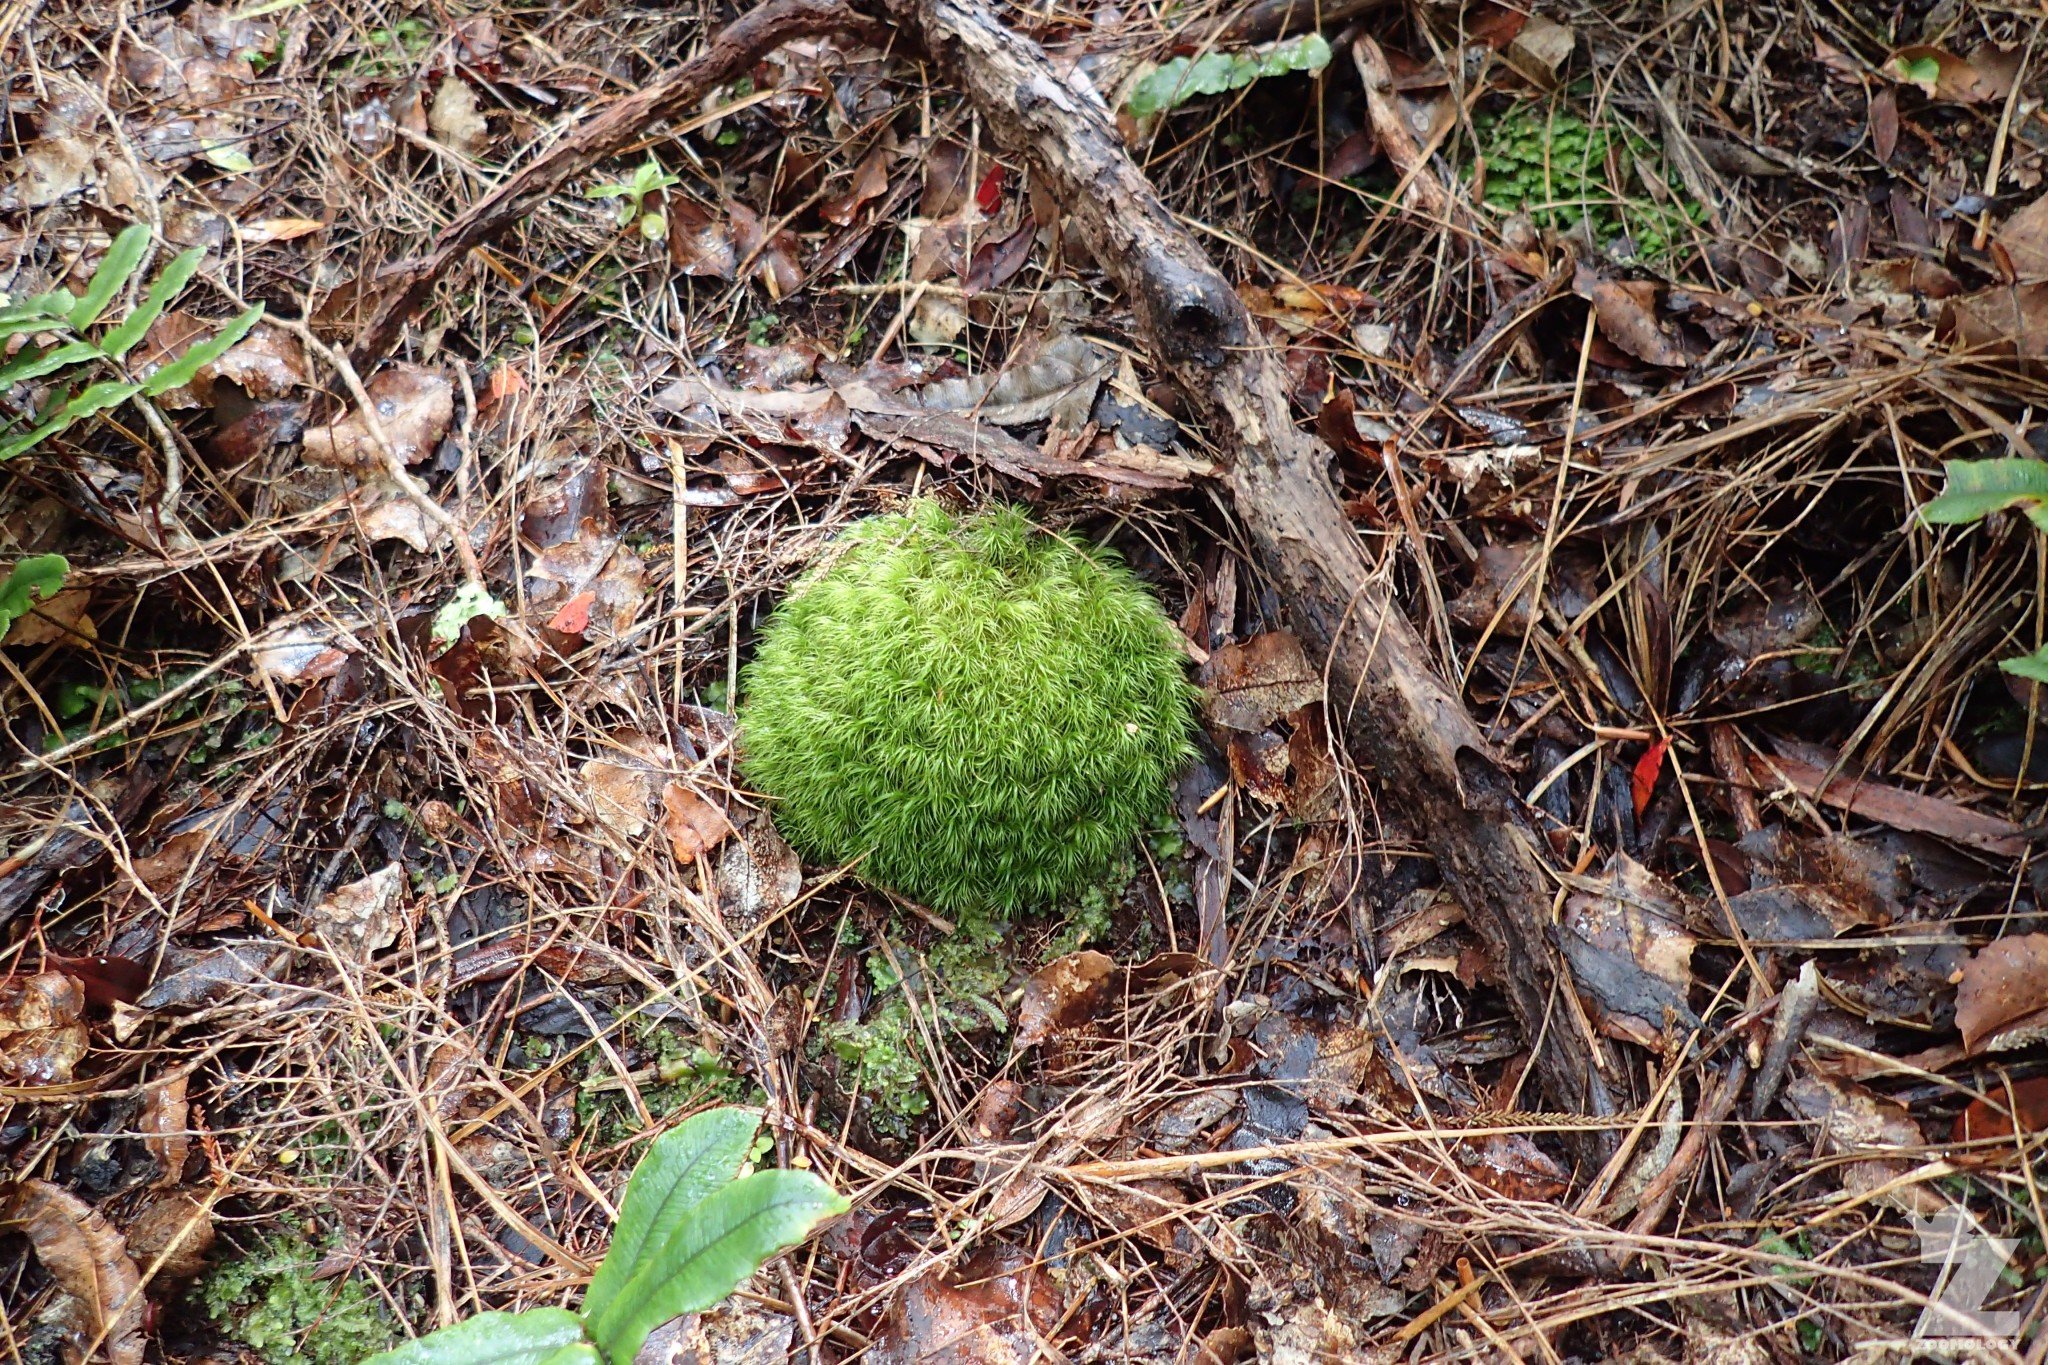 Moss was easily mistaken for kākāpō throughout the trip. Image: Emma Crawford)